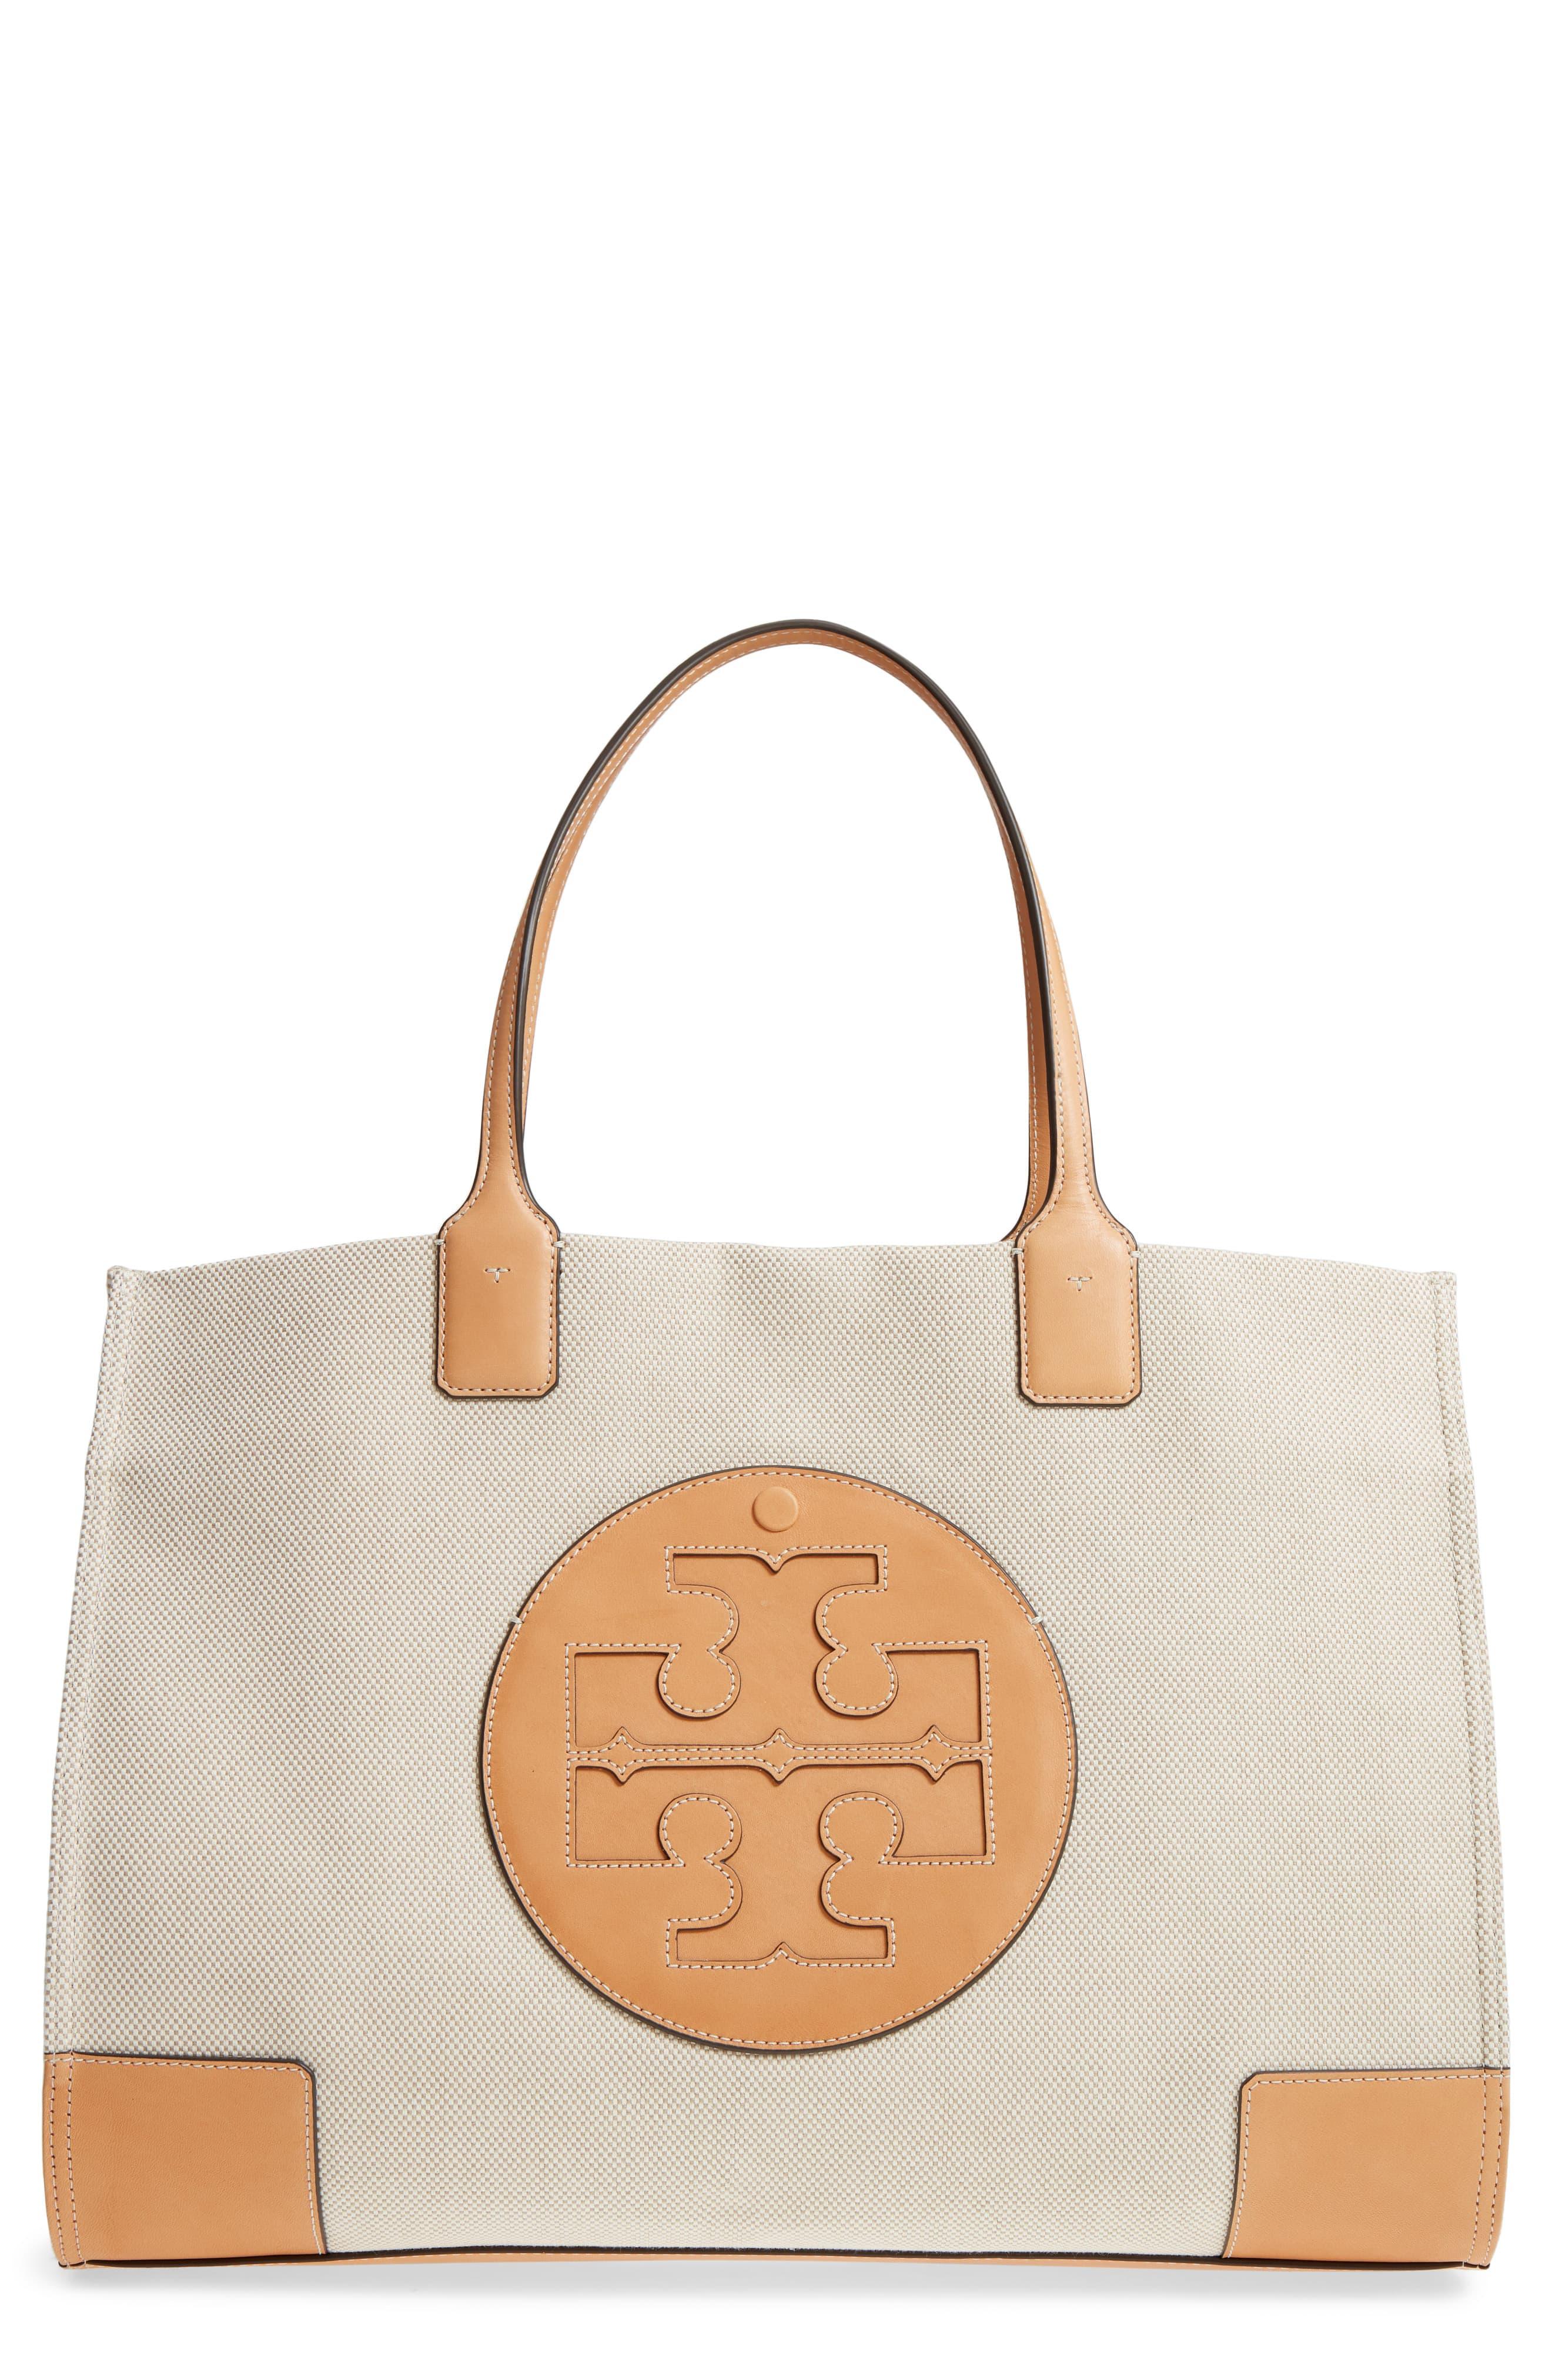 Tory Burch Ella Canvas Tote in Natural / Ivory (Natural) - Lyst